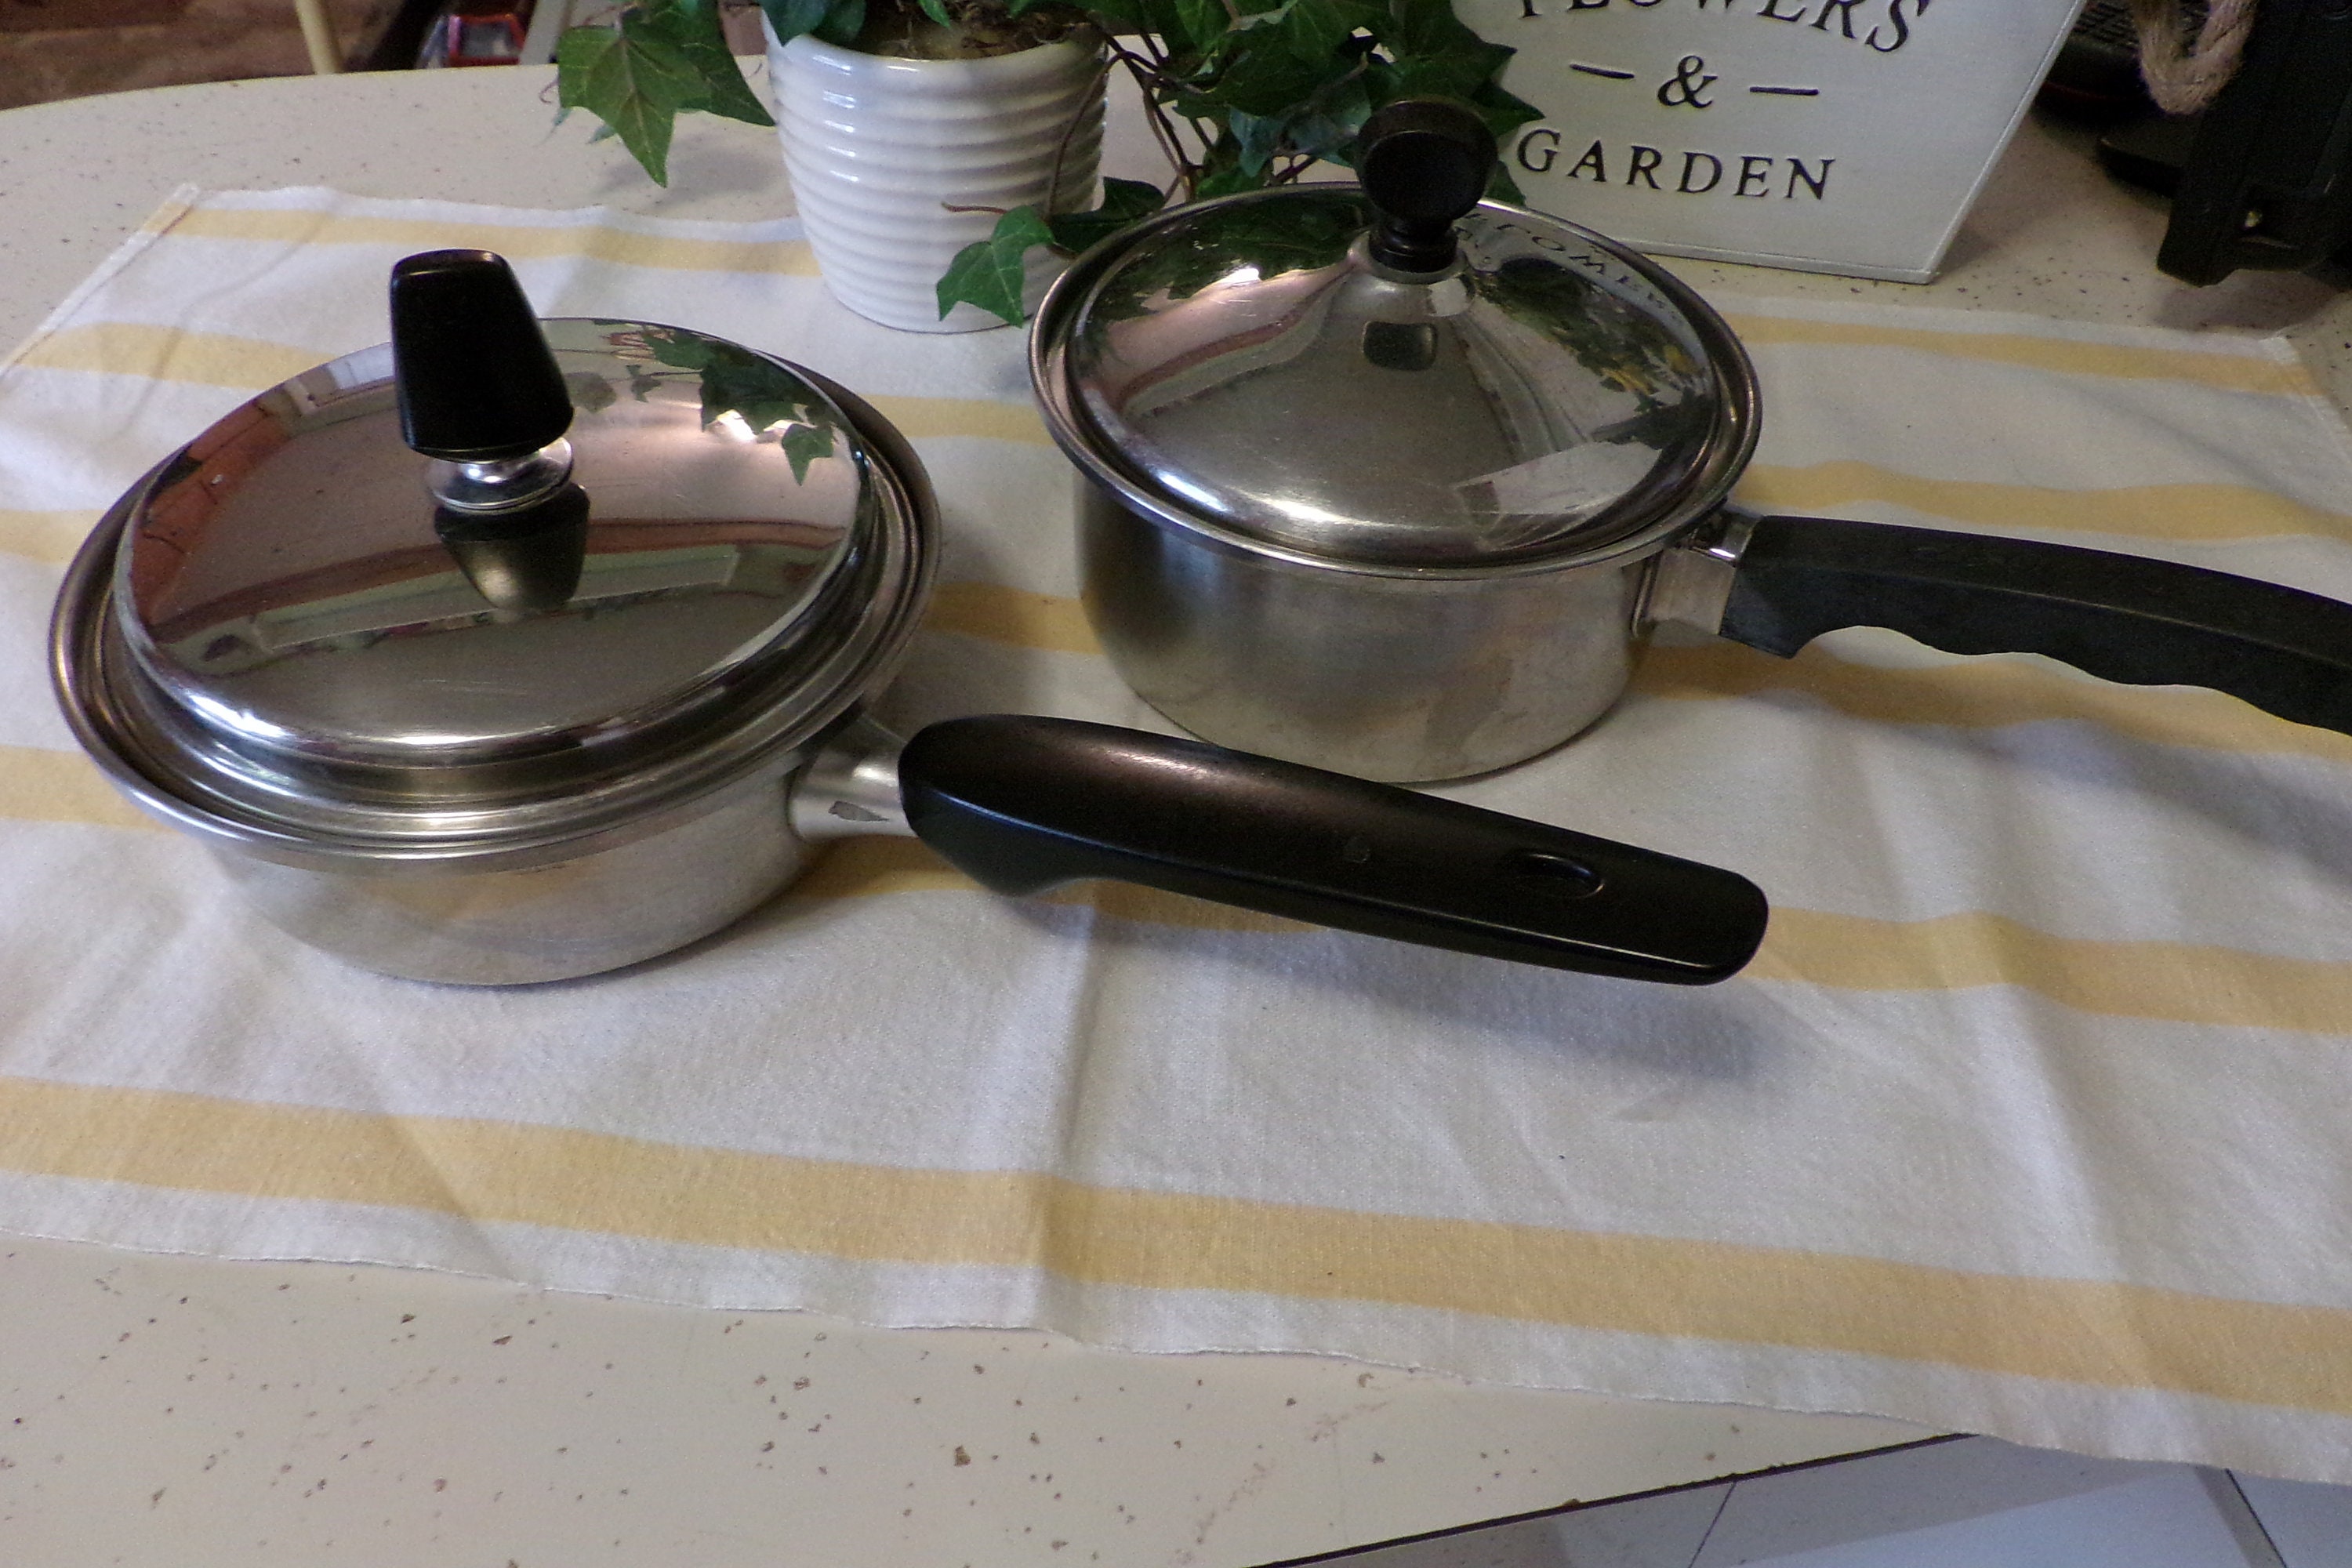 Regal Ware American Kitchen TriPly Stainless Steel Make Enough for